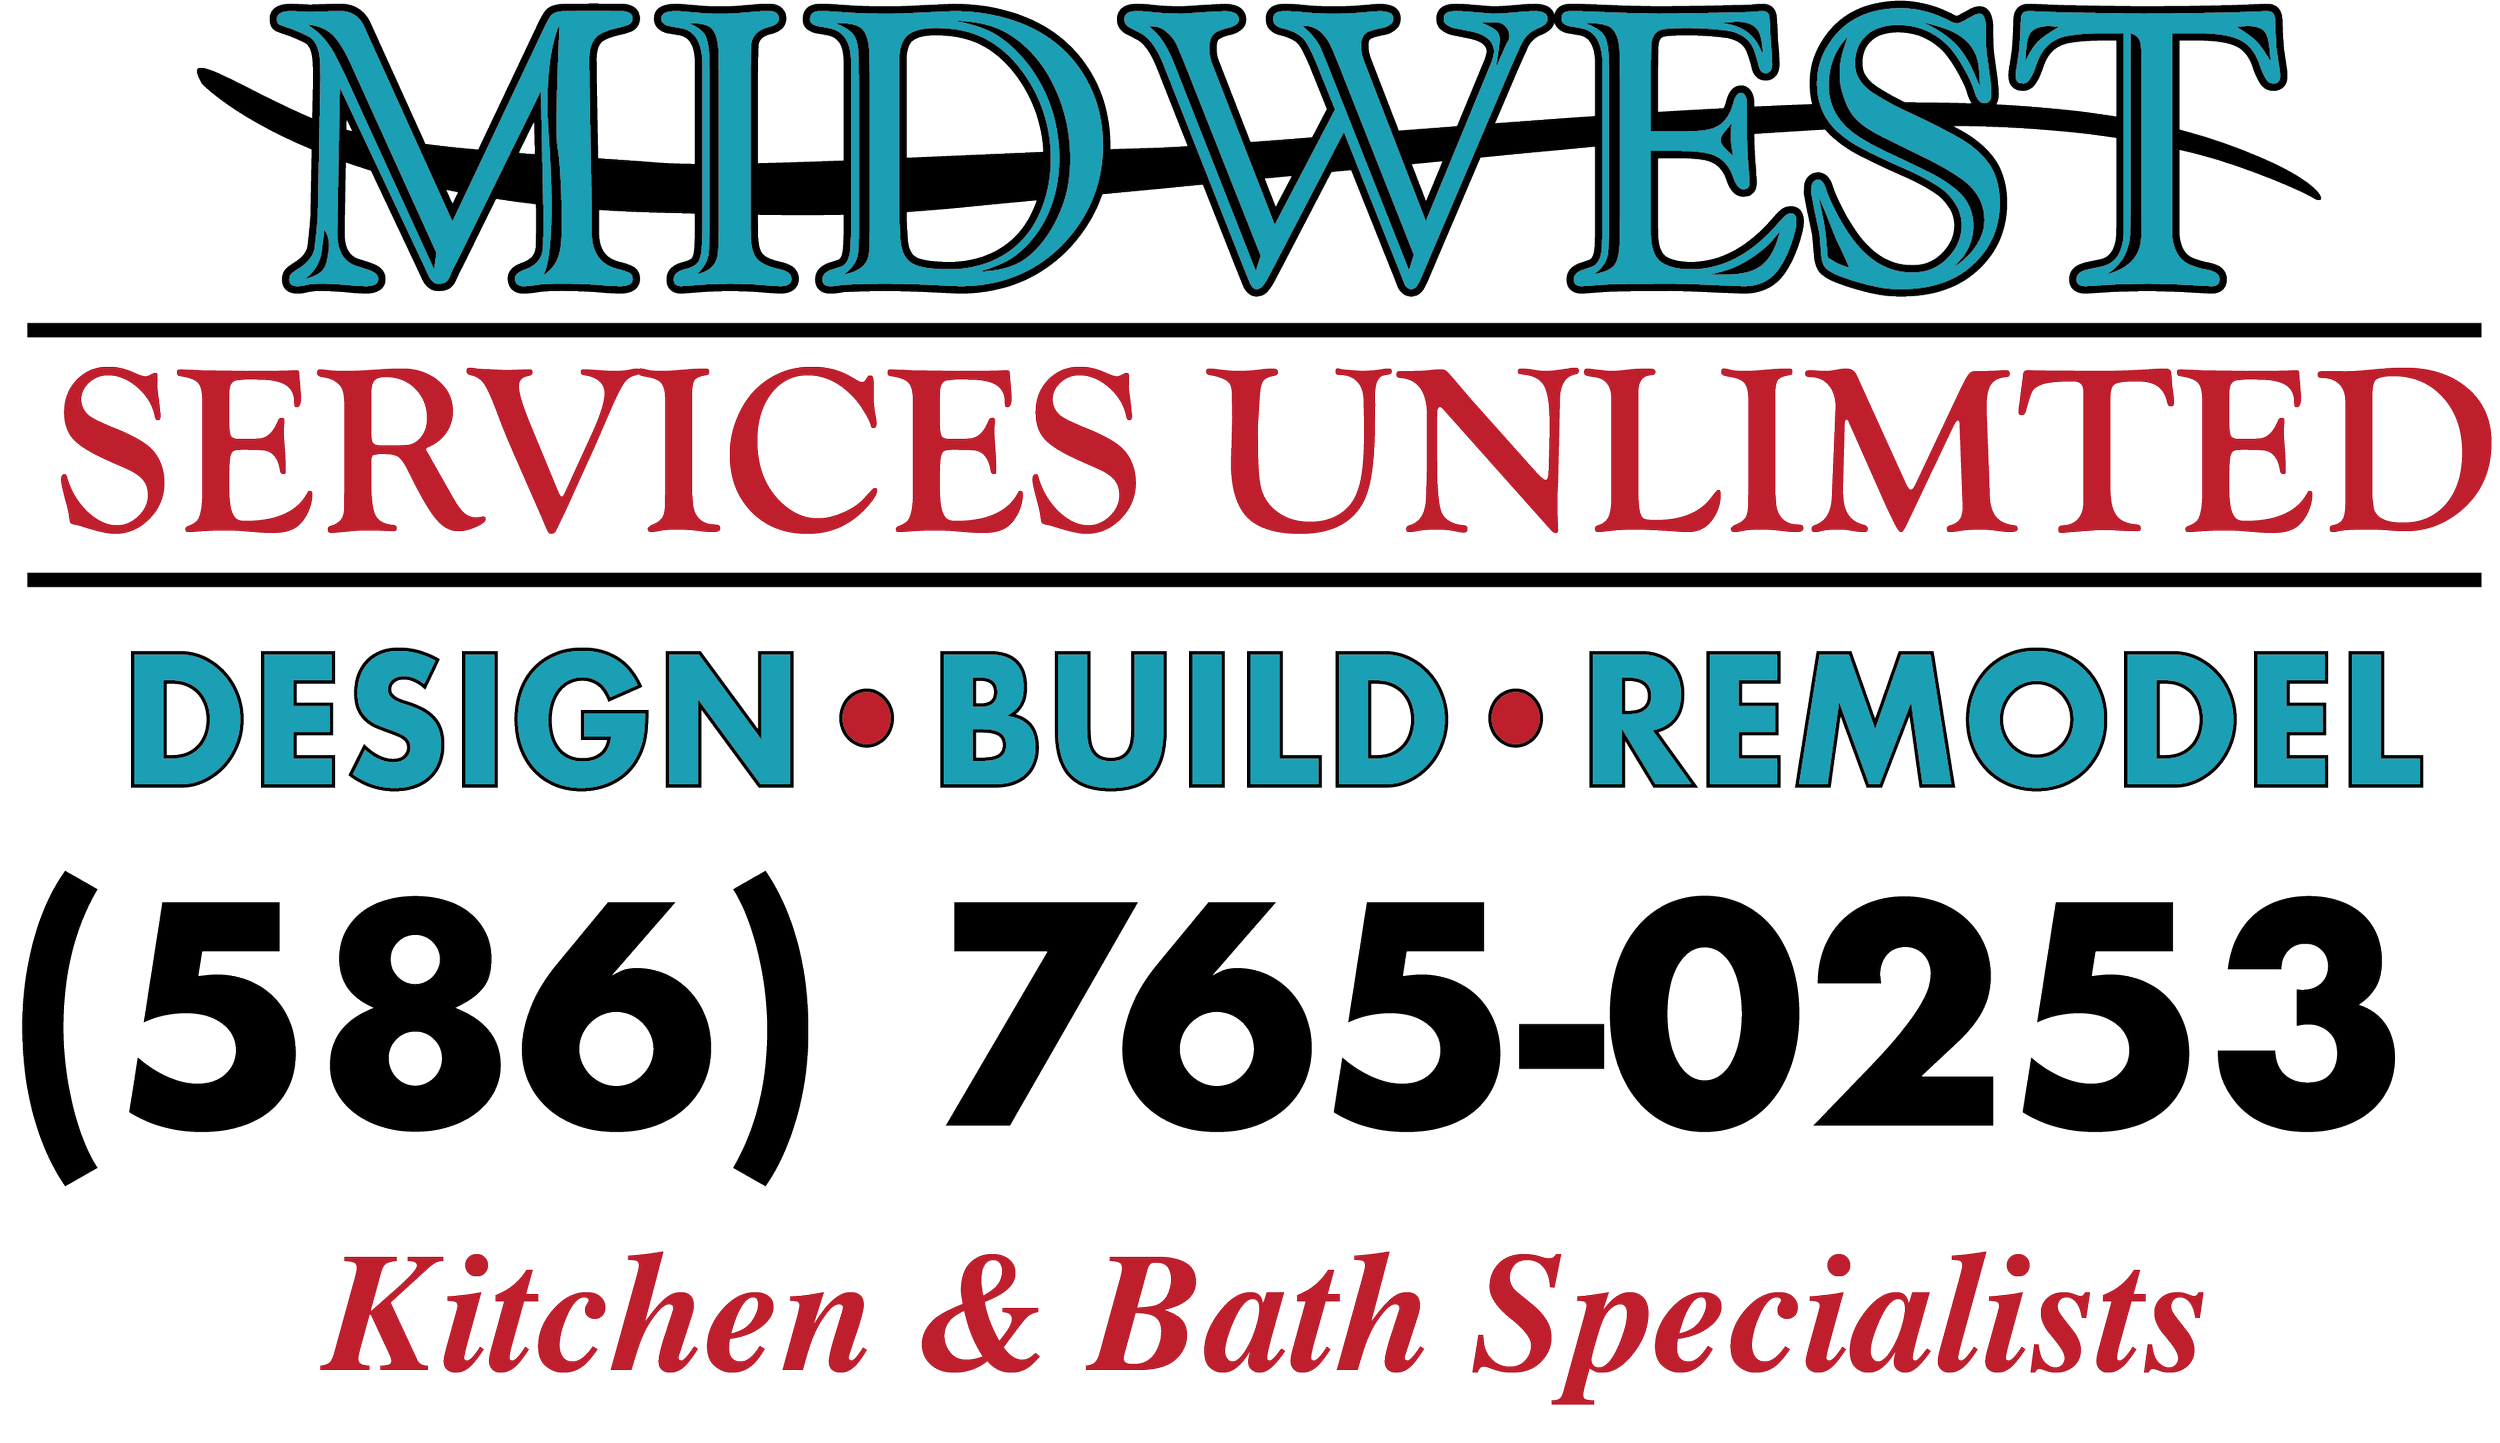 MidwestServices Unlimited.png